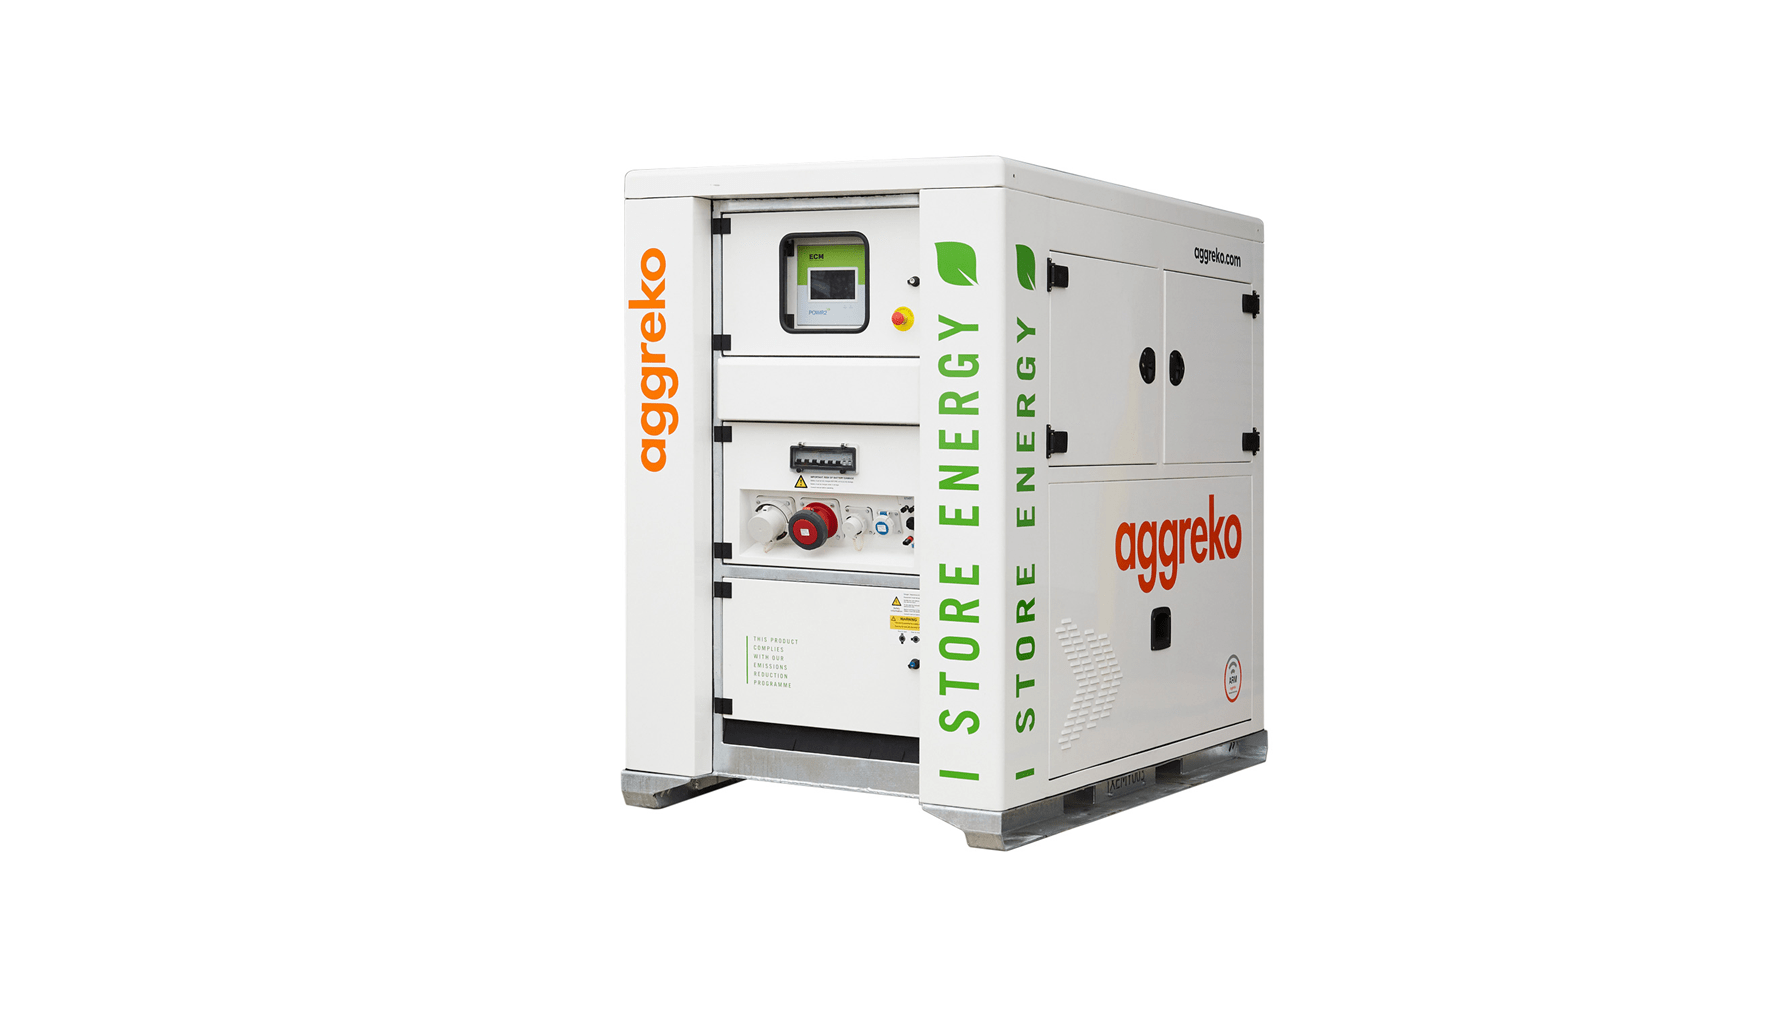 A single white battery emblazoned with Aggreko livery